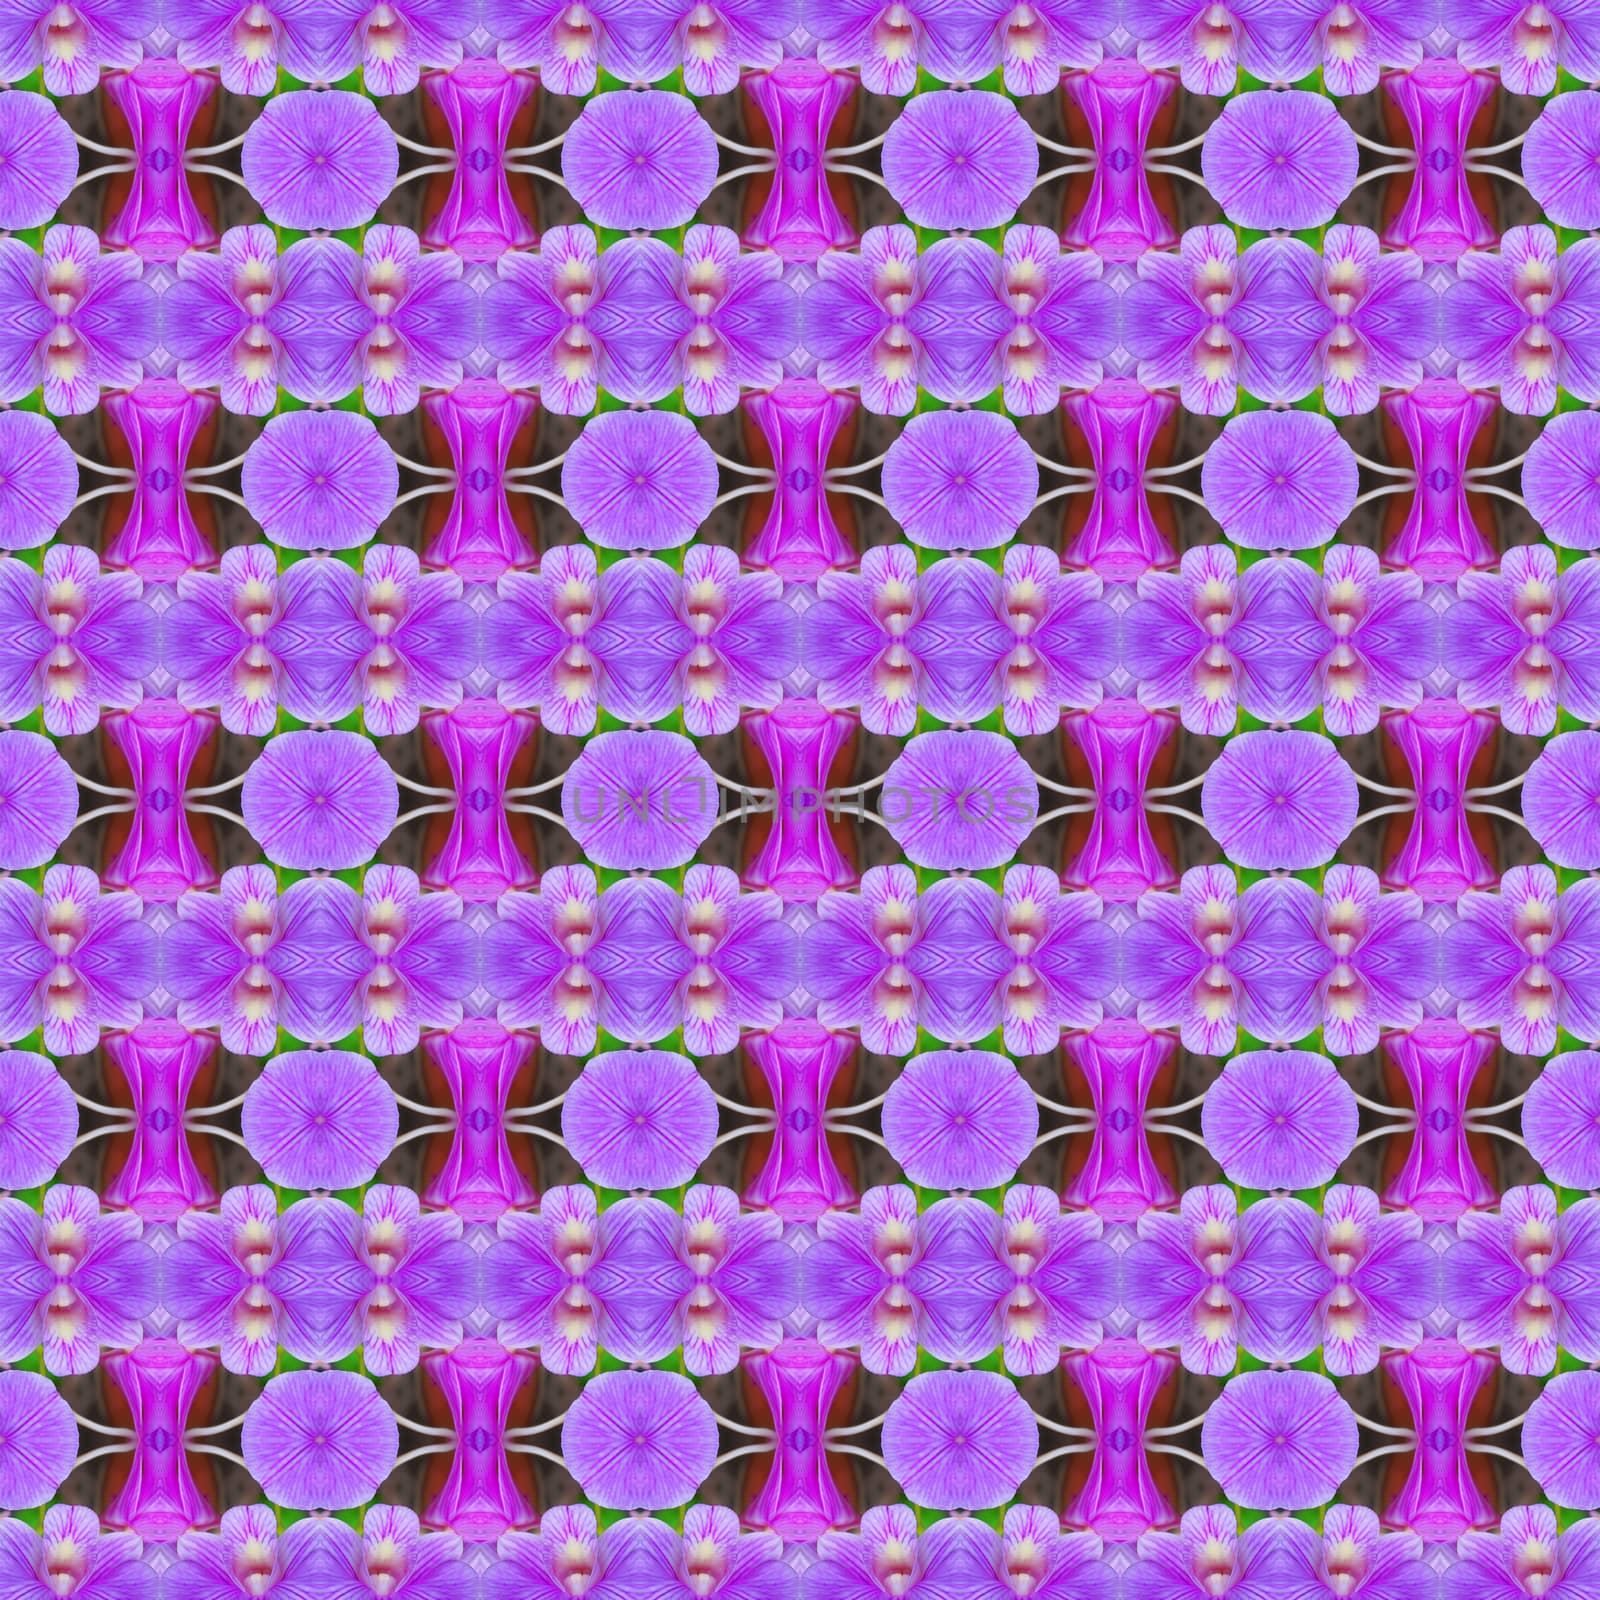 
Purple orchids, a bouquet of flowers are in full bloom seamless use as pattern and wallpaper.